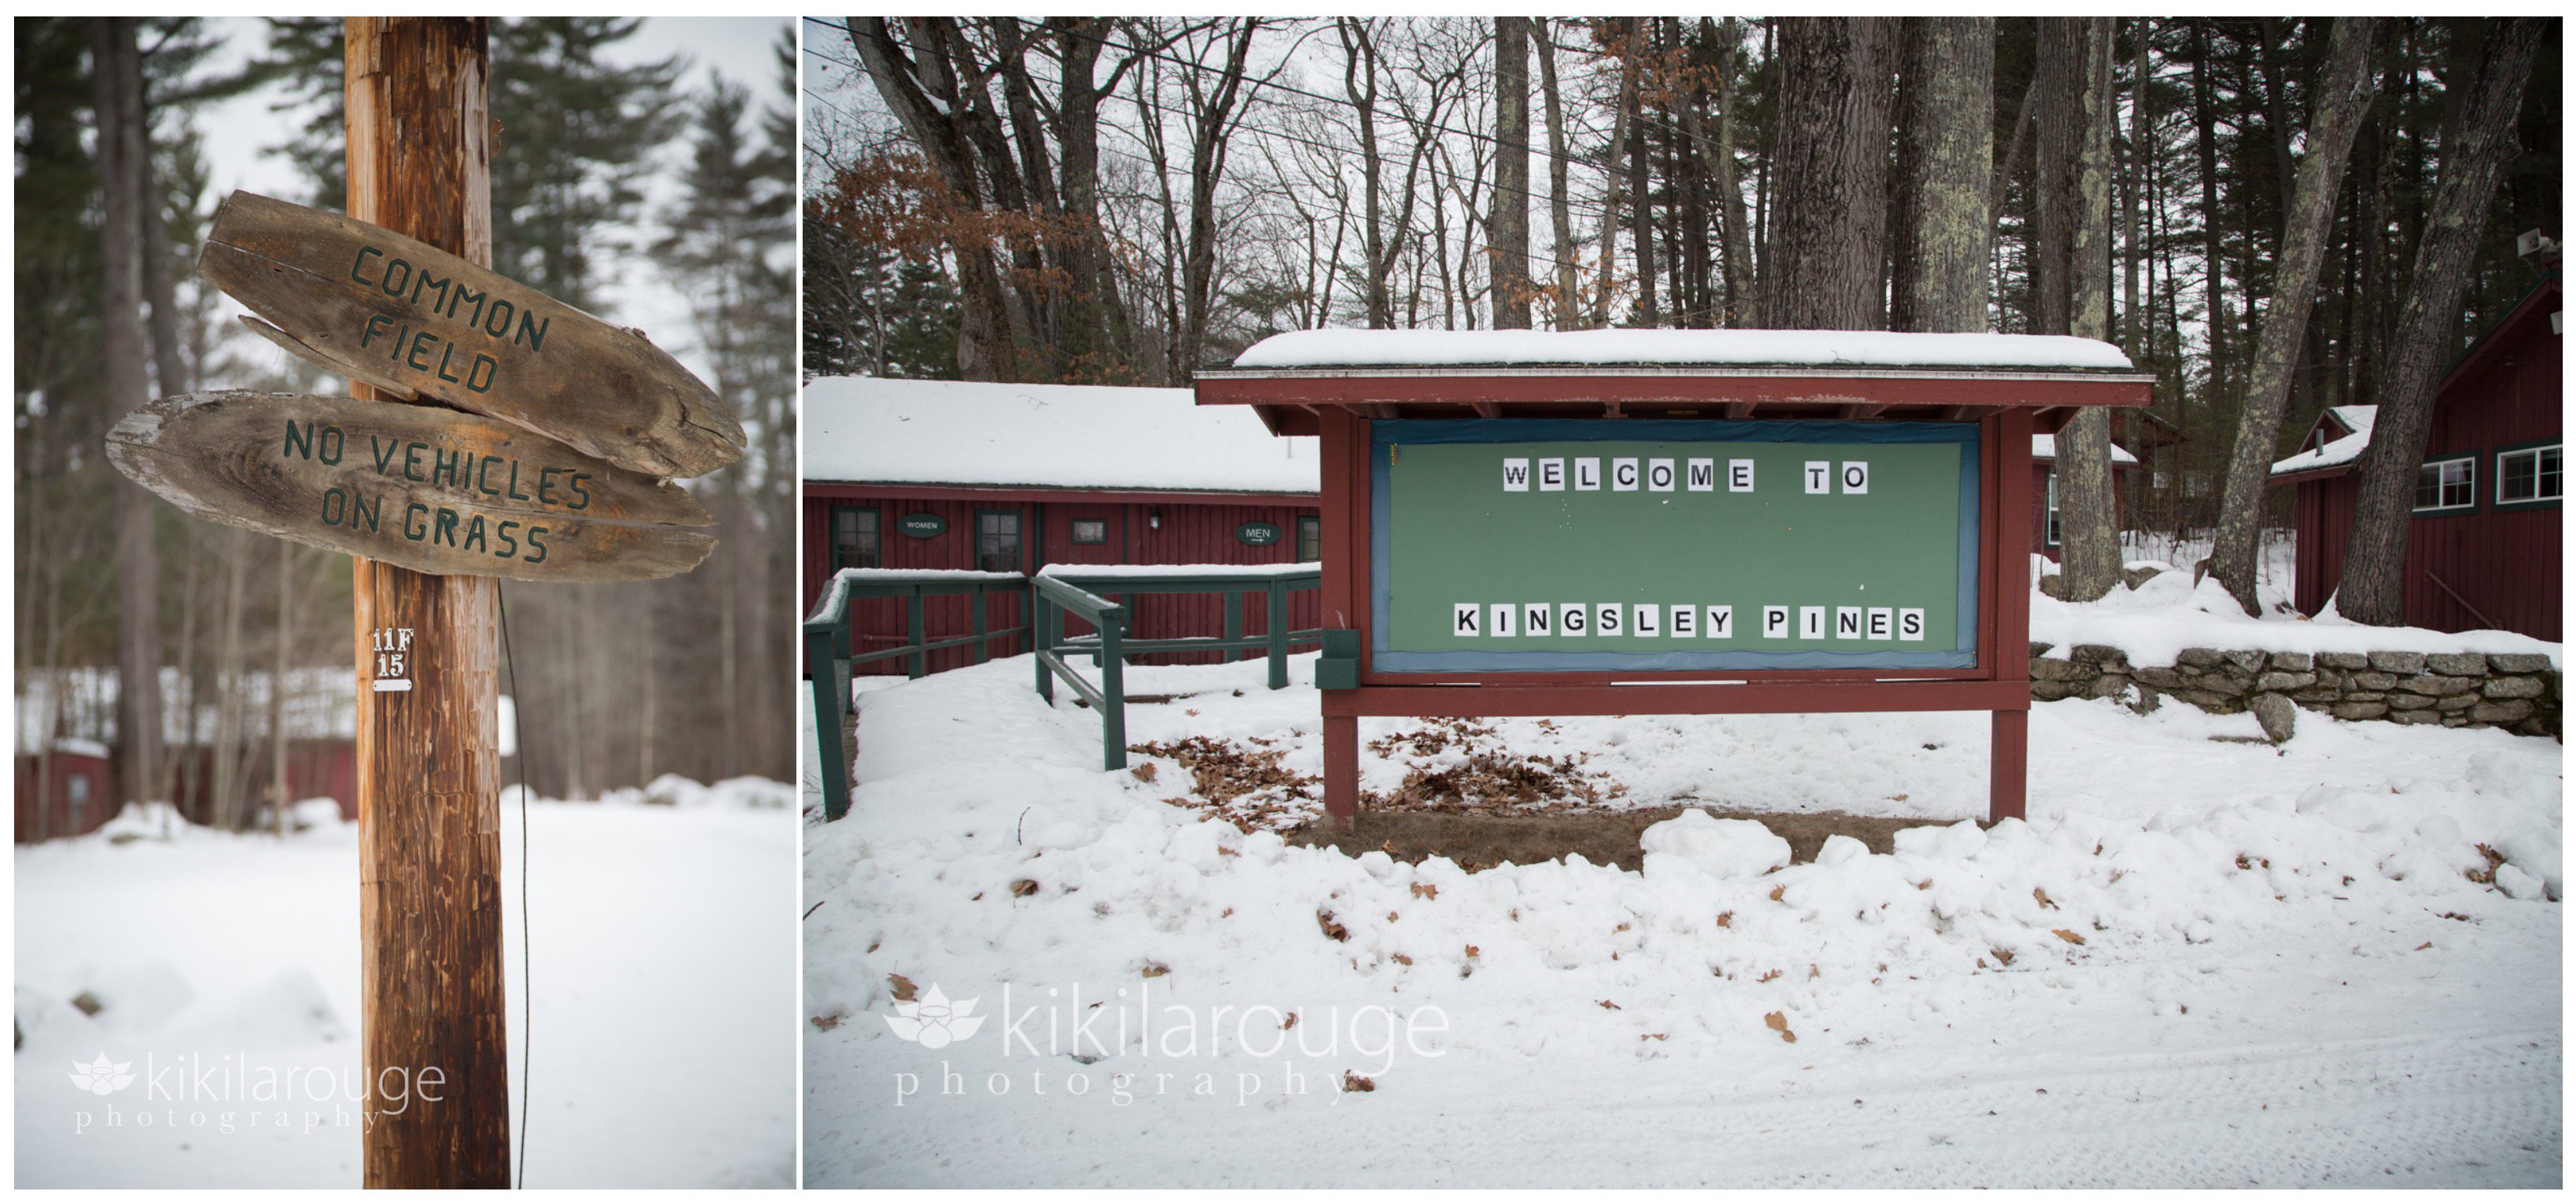 Signs at Kingsley Pines Camp in Maine